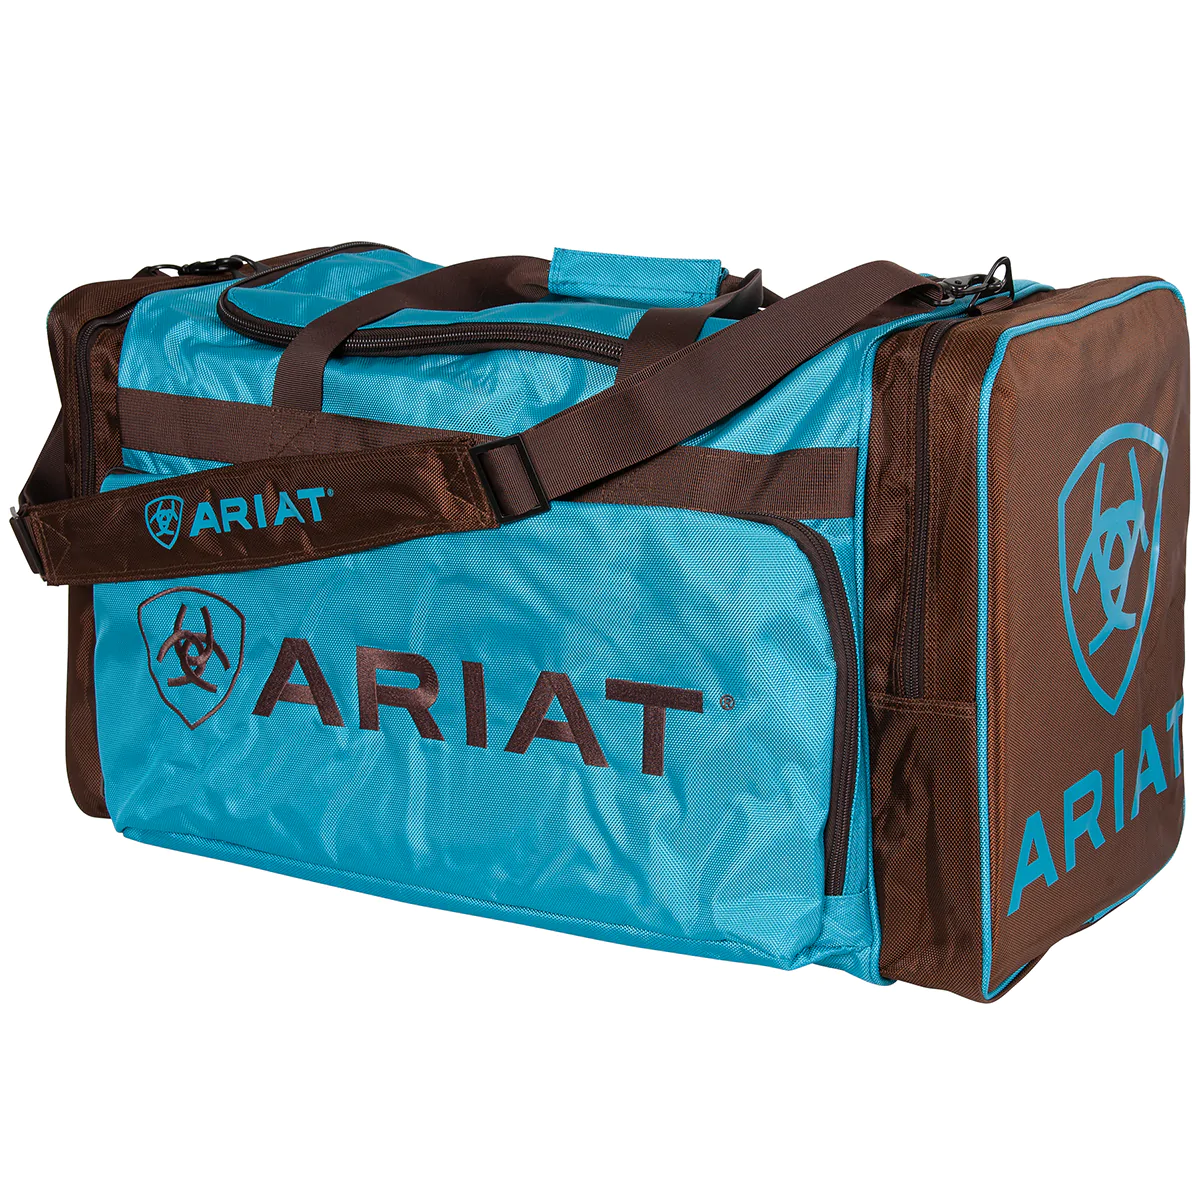 Ariat Gear Bag~ Turquoise/Brown